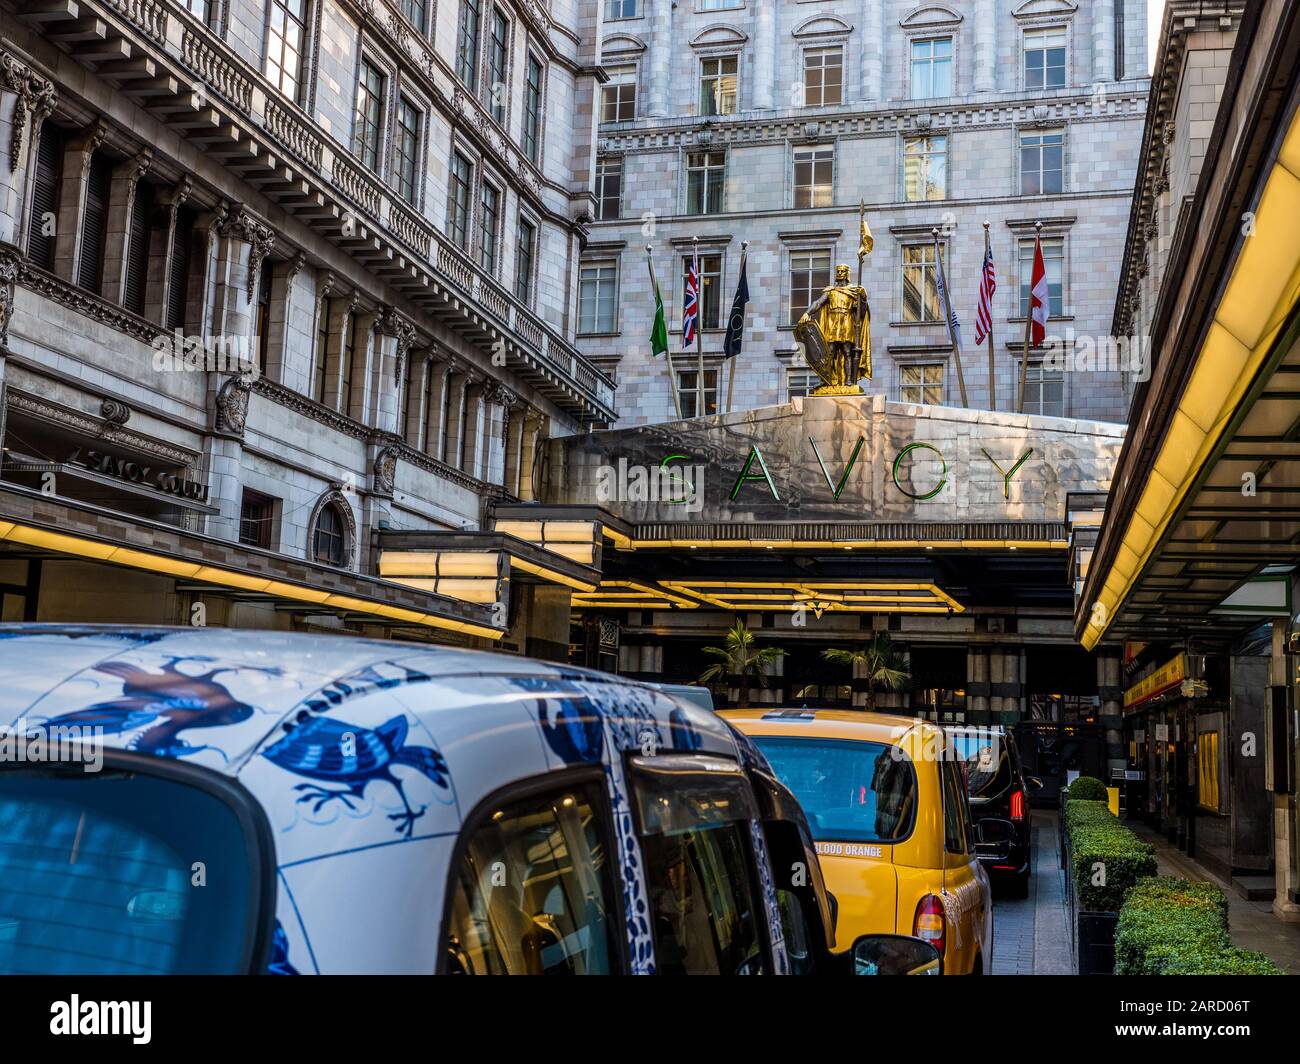 Taxies Outside, The Savoy Hotel, Front Entrance, on The Strand, City of Westminster, London, England, UK, GB. Stock Photo